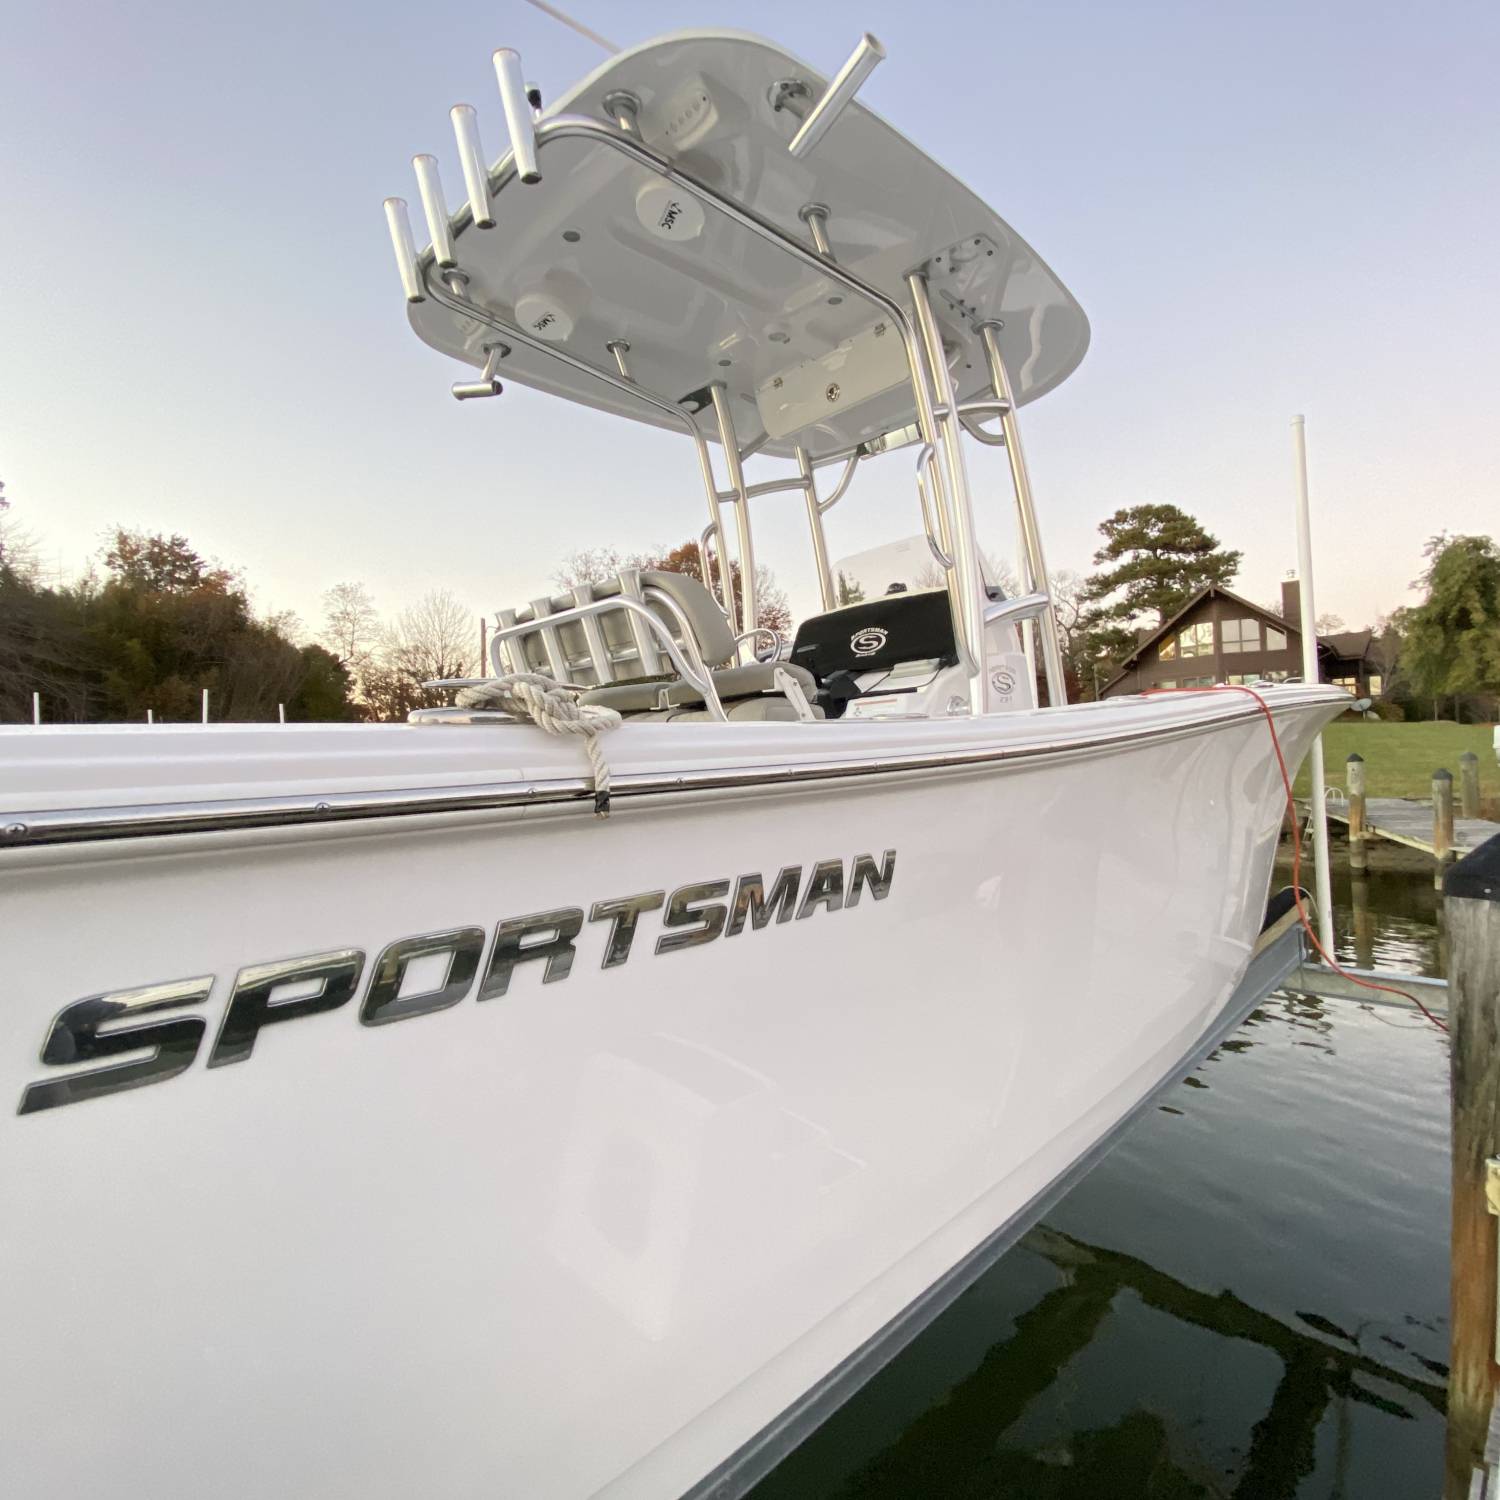 Title: Kaptain Kermit - On board their Sportsman Heritage 231 Center Console - Location: Solomons Island Md. Participating in the Photo Contest #SportsmanMarch